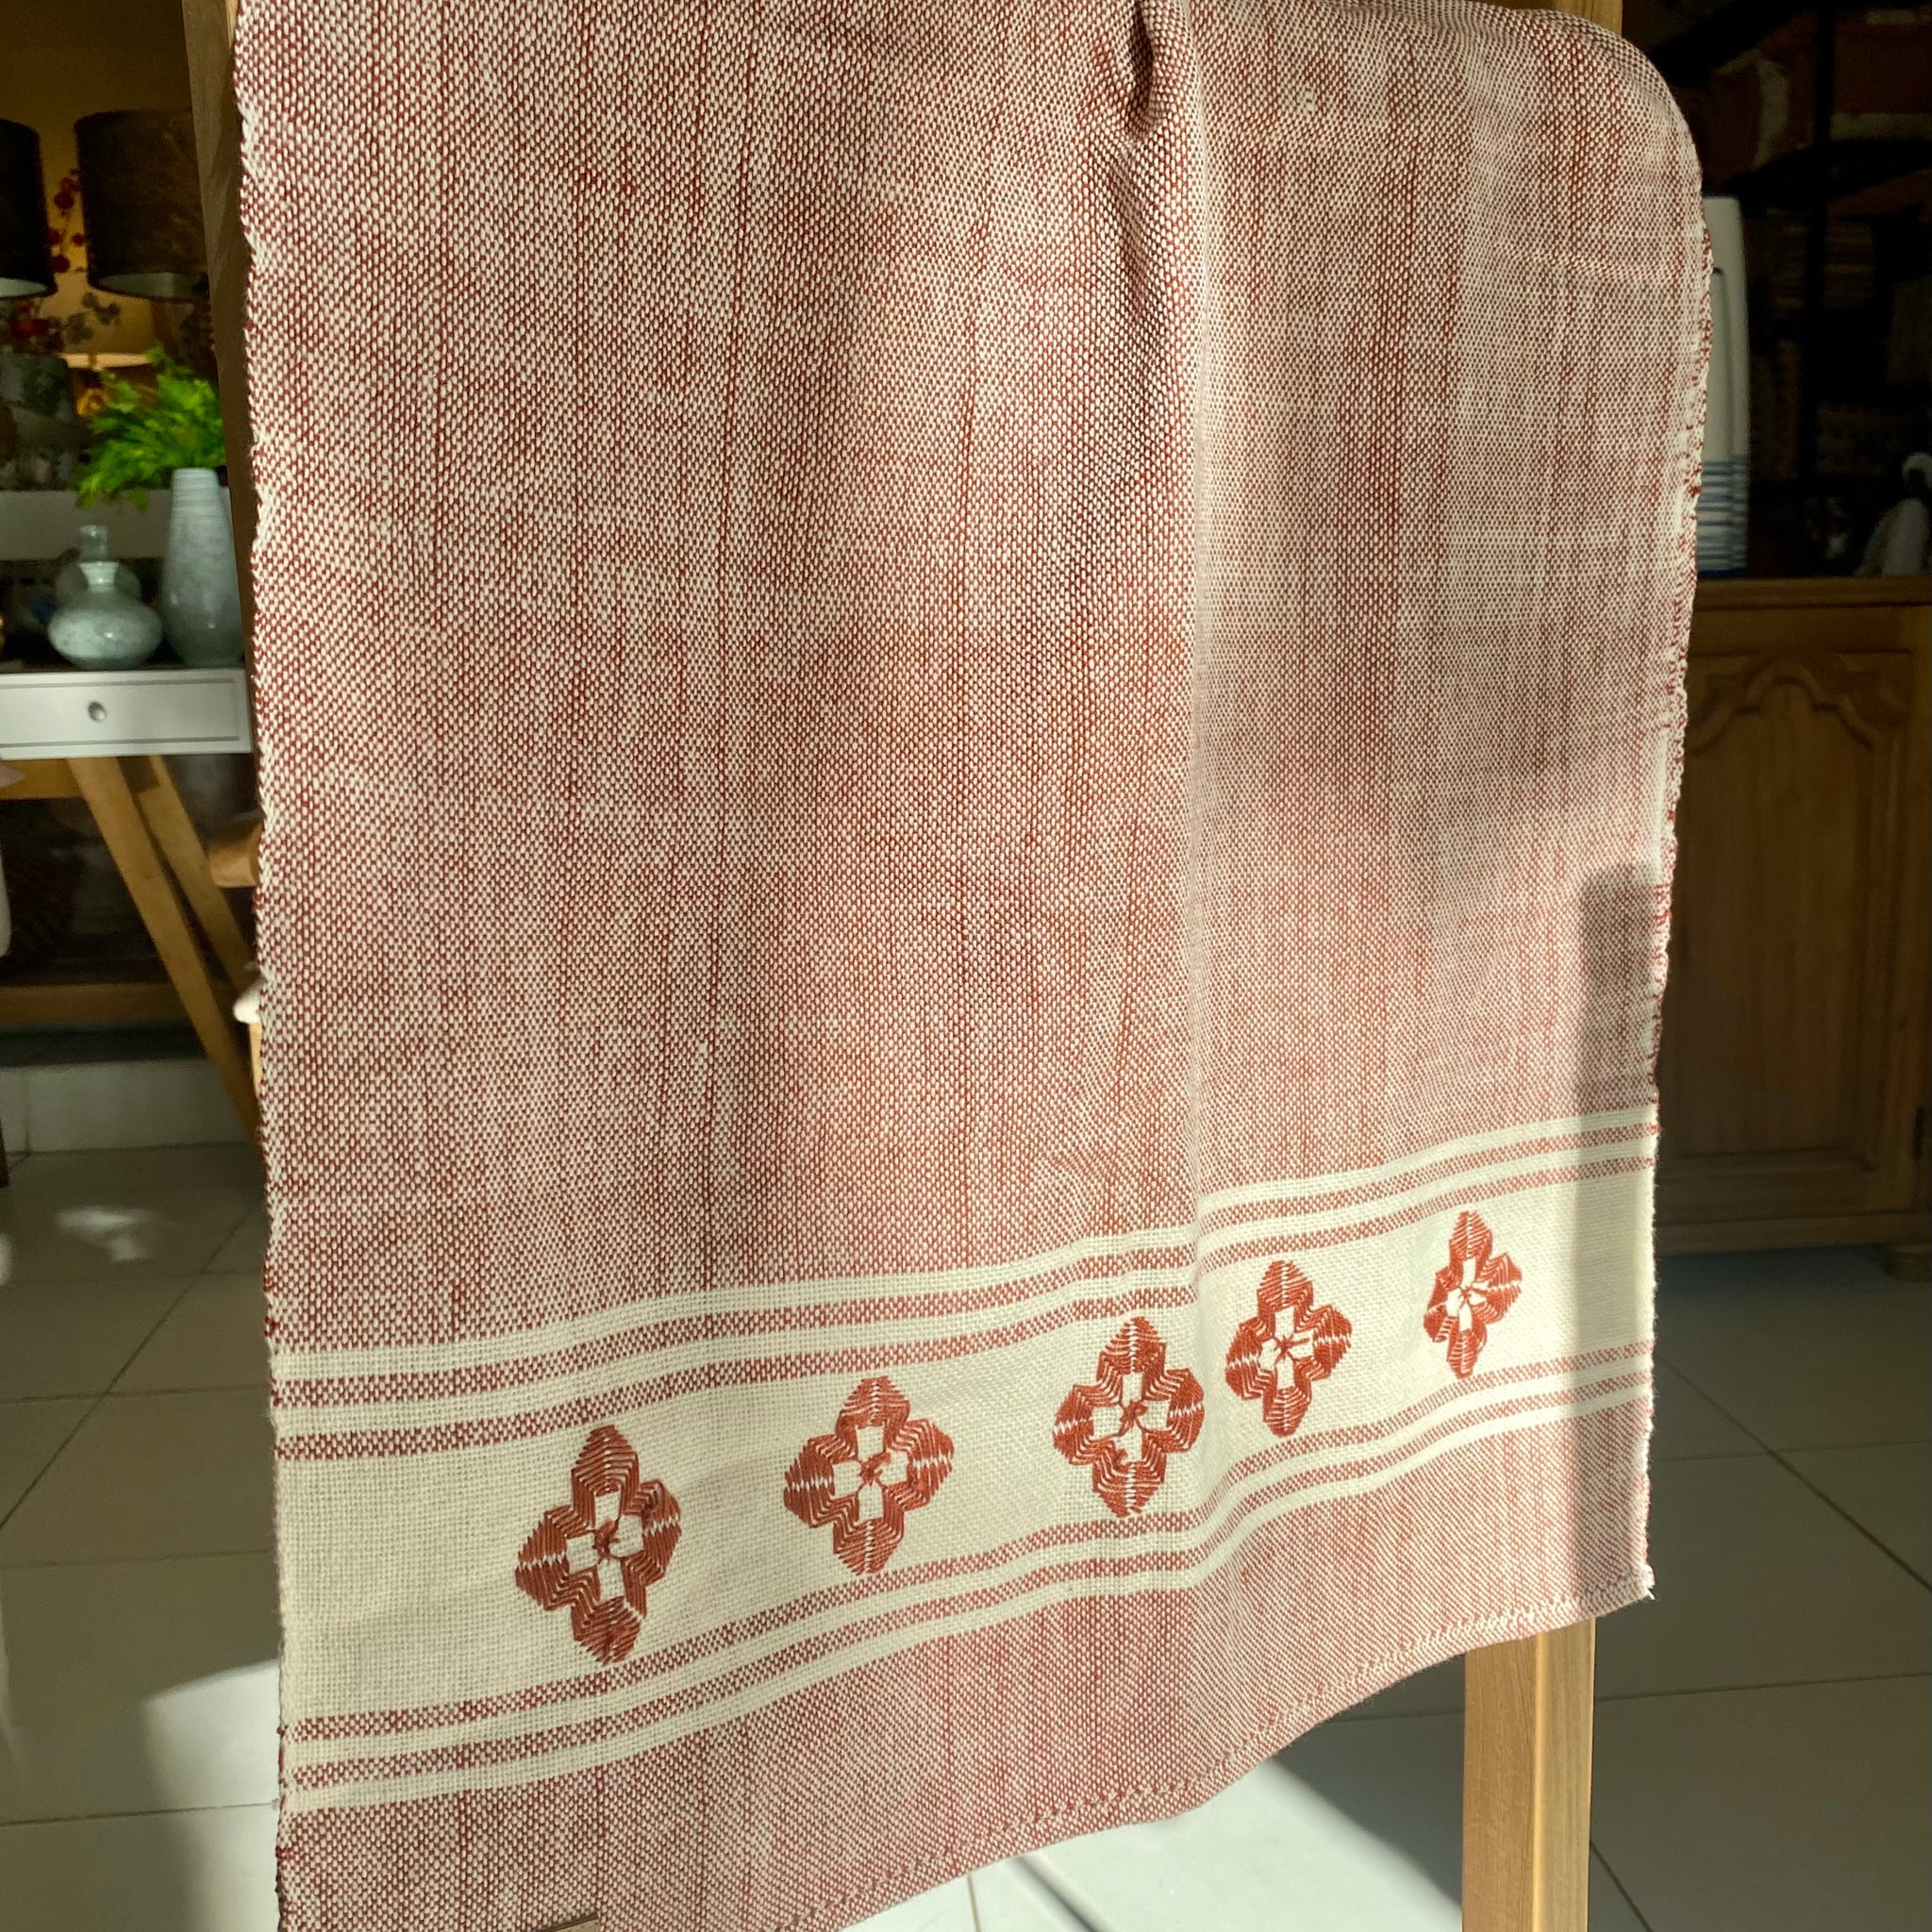 ROAD AND/OR BLANKET OF AUTHENTIC AO PO'I FABRIC ¨MARGARITA¨ - G